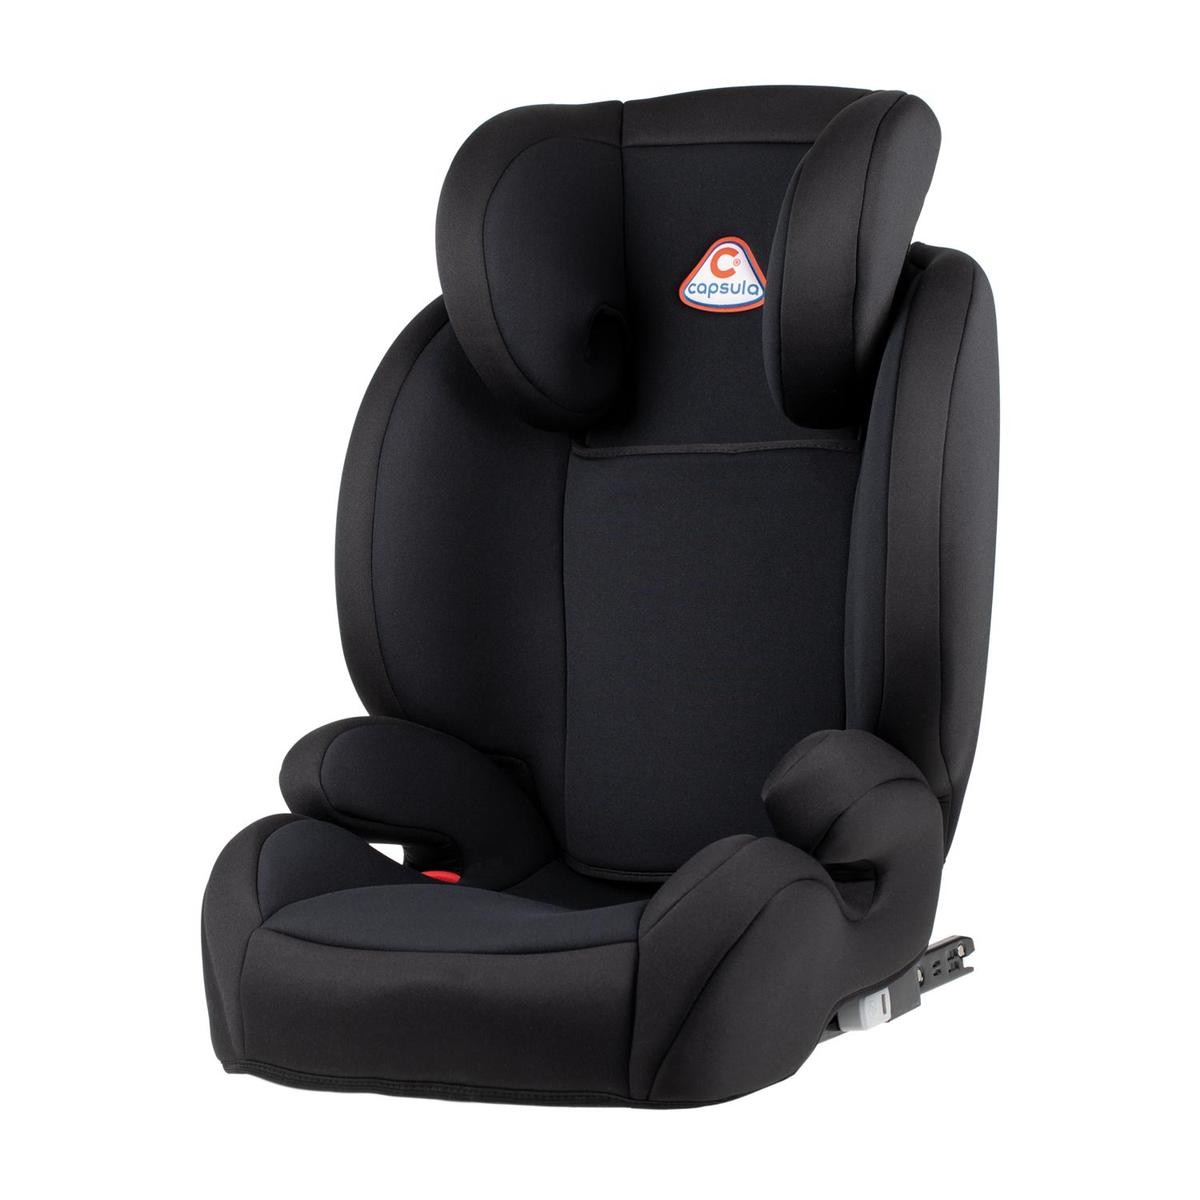 capsula MT5X 772110 Child car seat Child weight: 15-36kg, Child seat harness: without seat harness